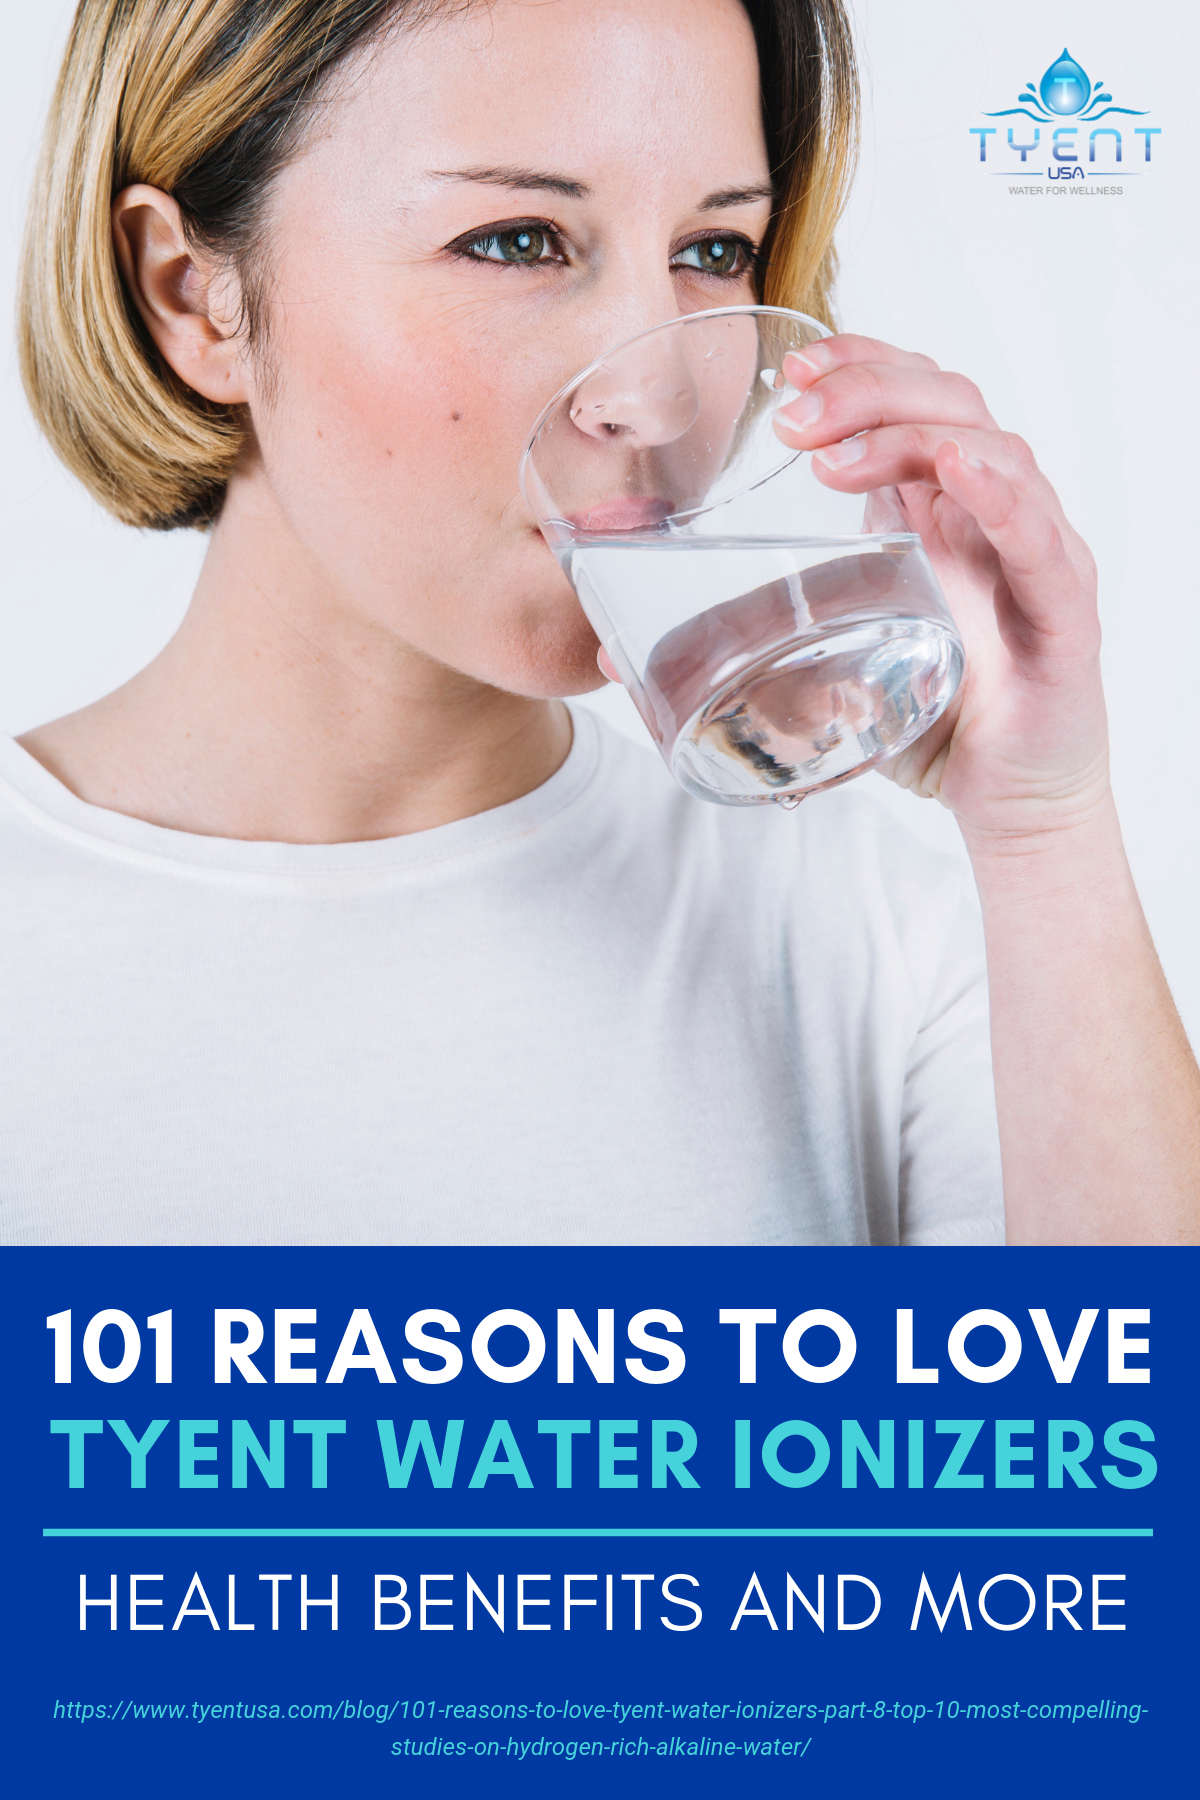 101 Reasons To Love Tyent Water Ionizers, Part 8: Top 10 Most Compelling Studies On Hydrogen-Rich Alkaline Water https://www.tyentusa.com/blog/101-reasons-to-love-tyent-water-ionizers-part-8-top-10-most-compelling-studies-on-hydrogen-rich-alkaline-water/